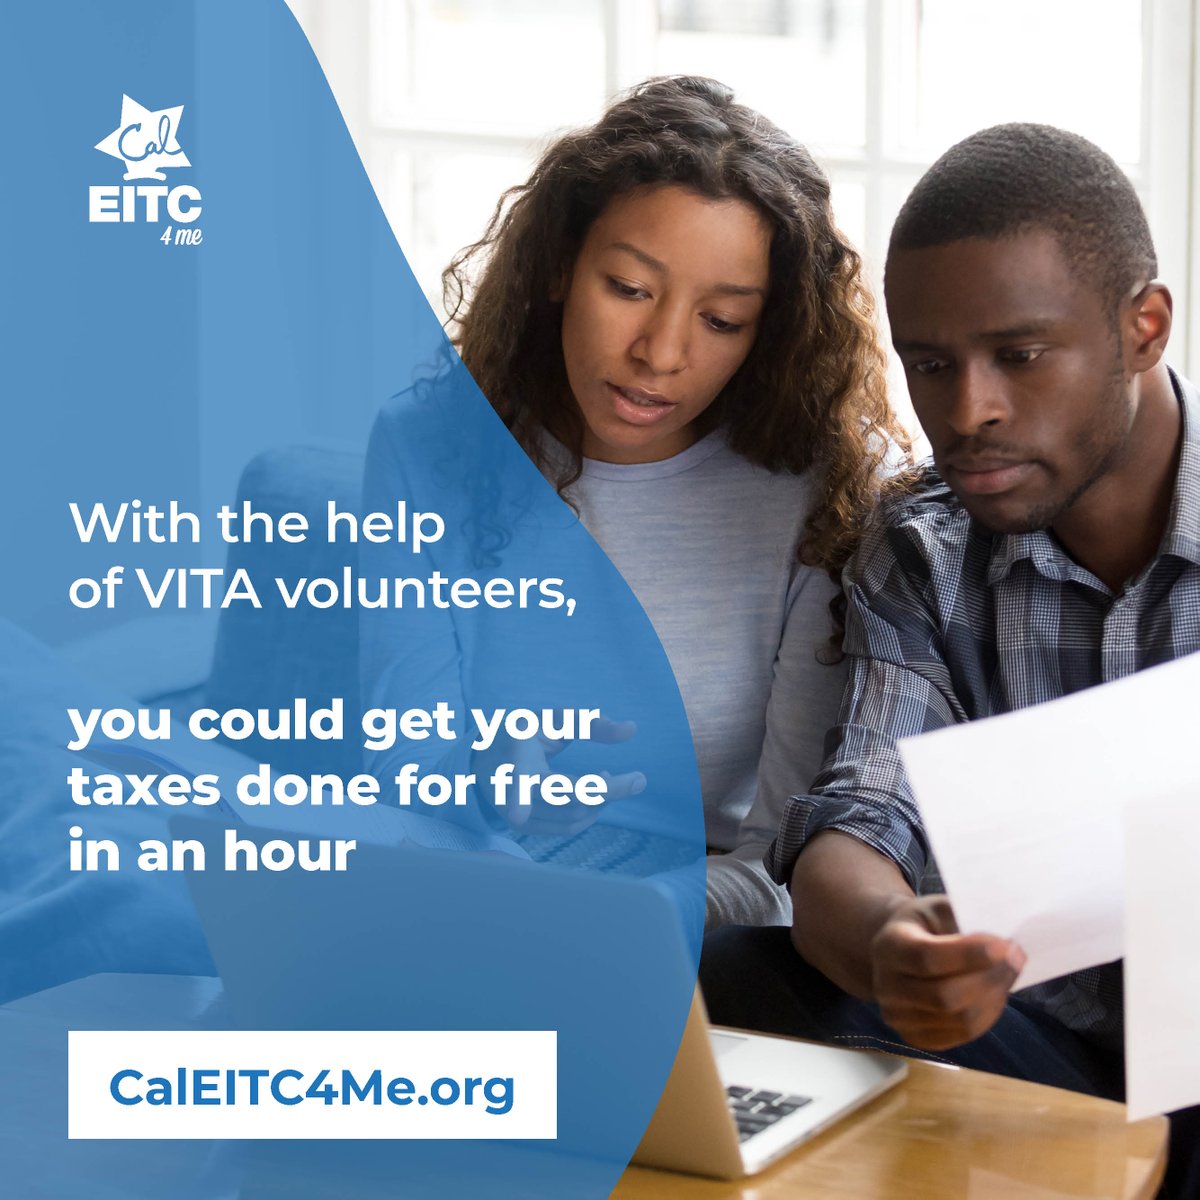 Did you know that, with the help of Volunteer Income Tax Assistance (VITA) volunteers, you could get your taxes done for free in as little as an hour? Get connected with an IRS-certified volunteer at CalEITC4Me.org